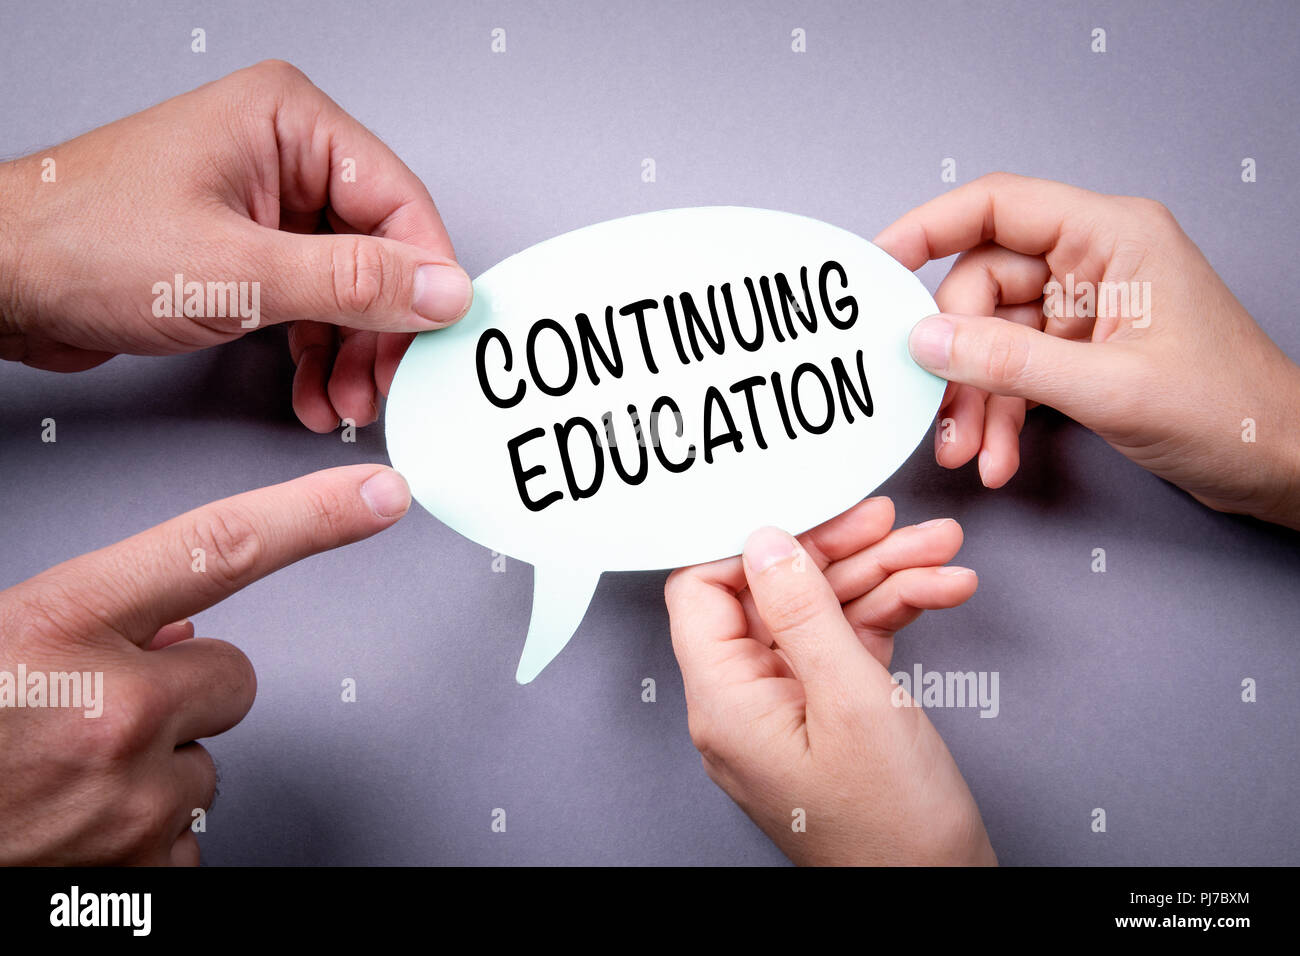 continuing education concept Stock Photo